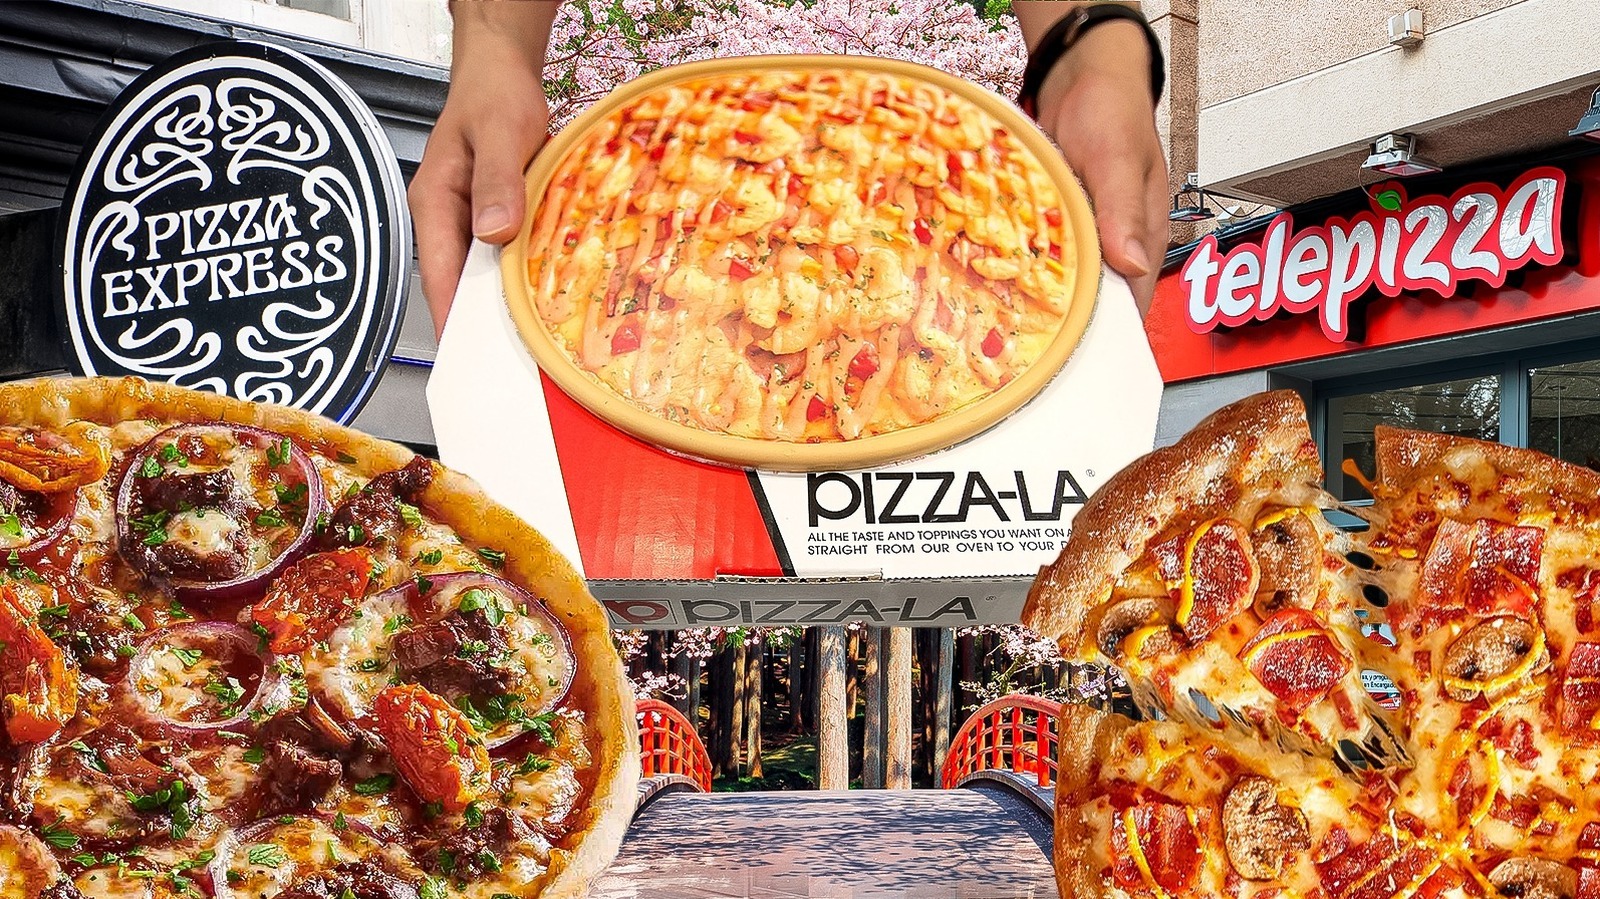 International Pizza Chains We Want To Come To The US